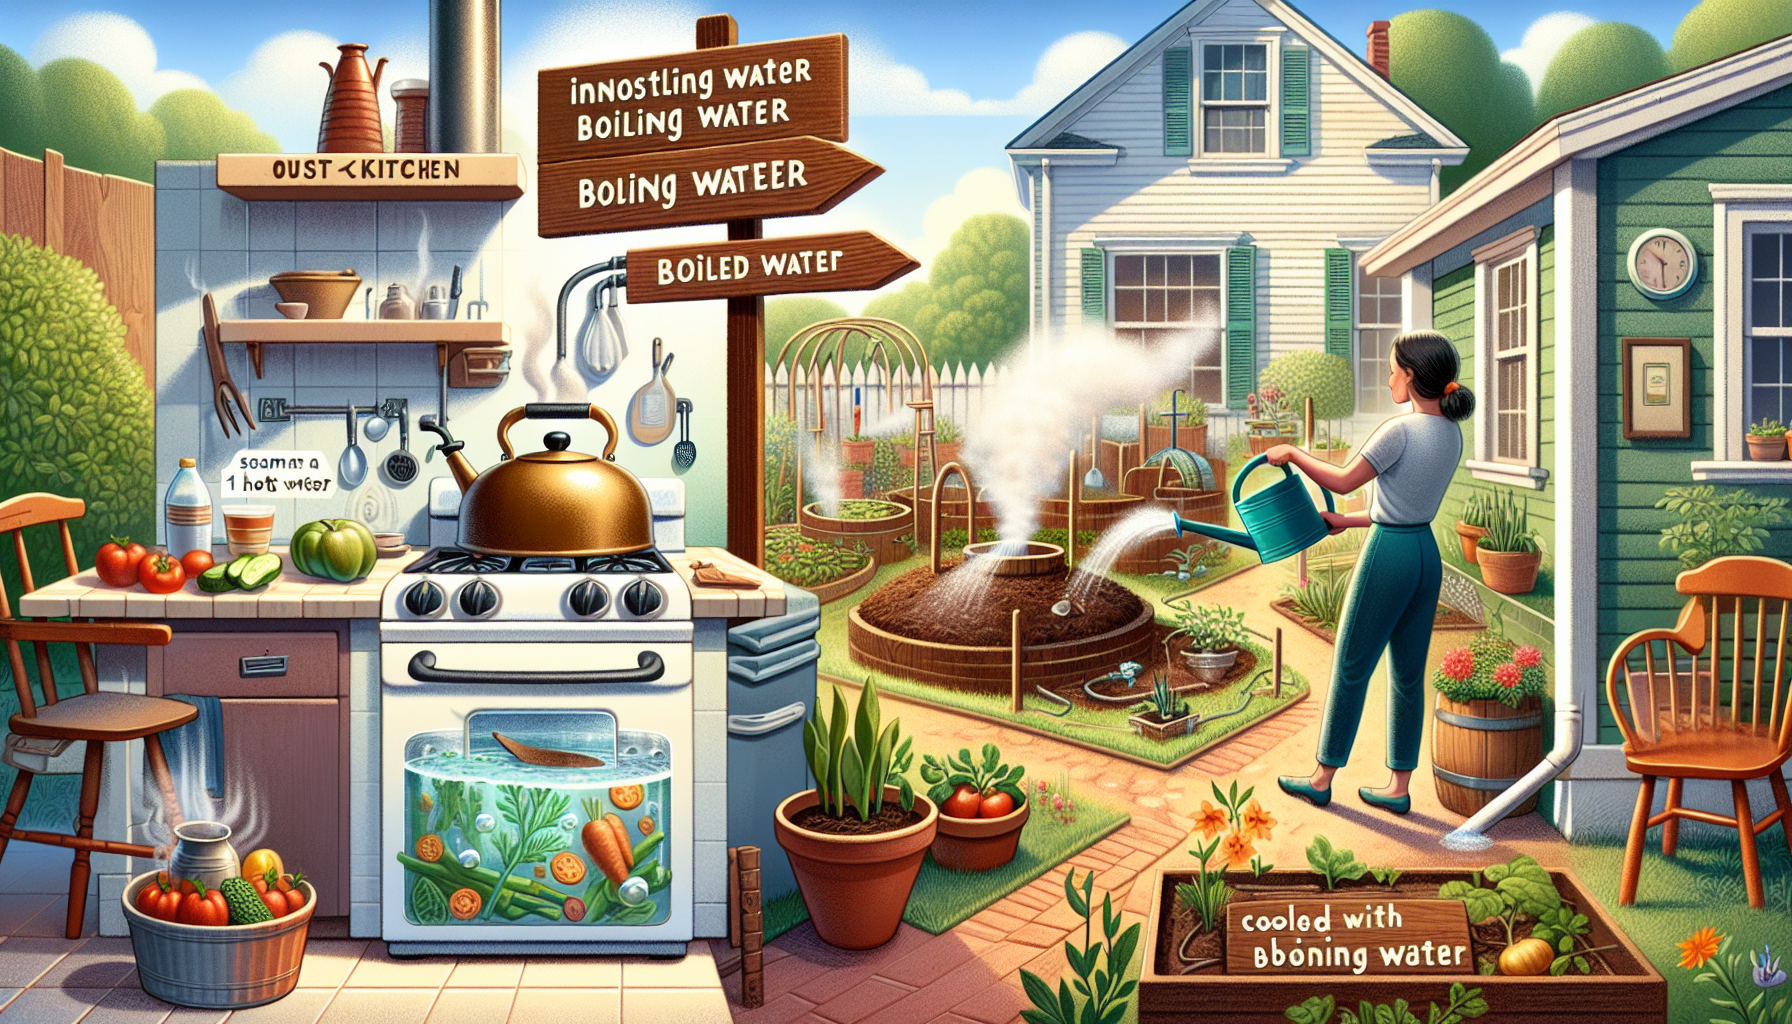 Reinvent your home and garden with innovative uses of boiling water